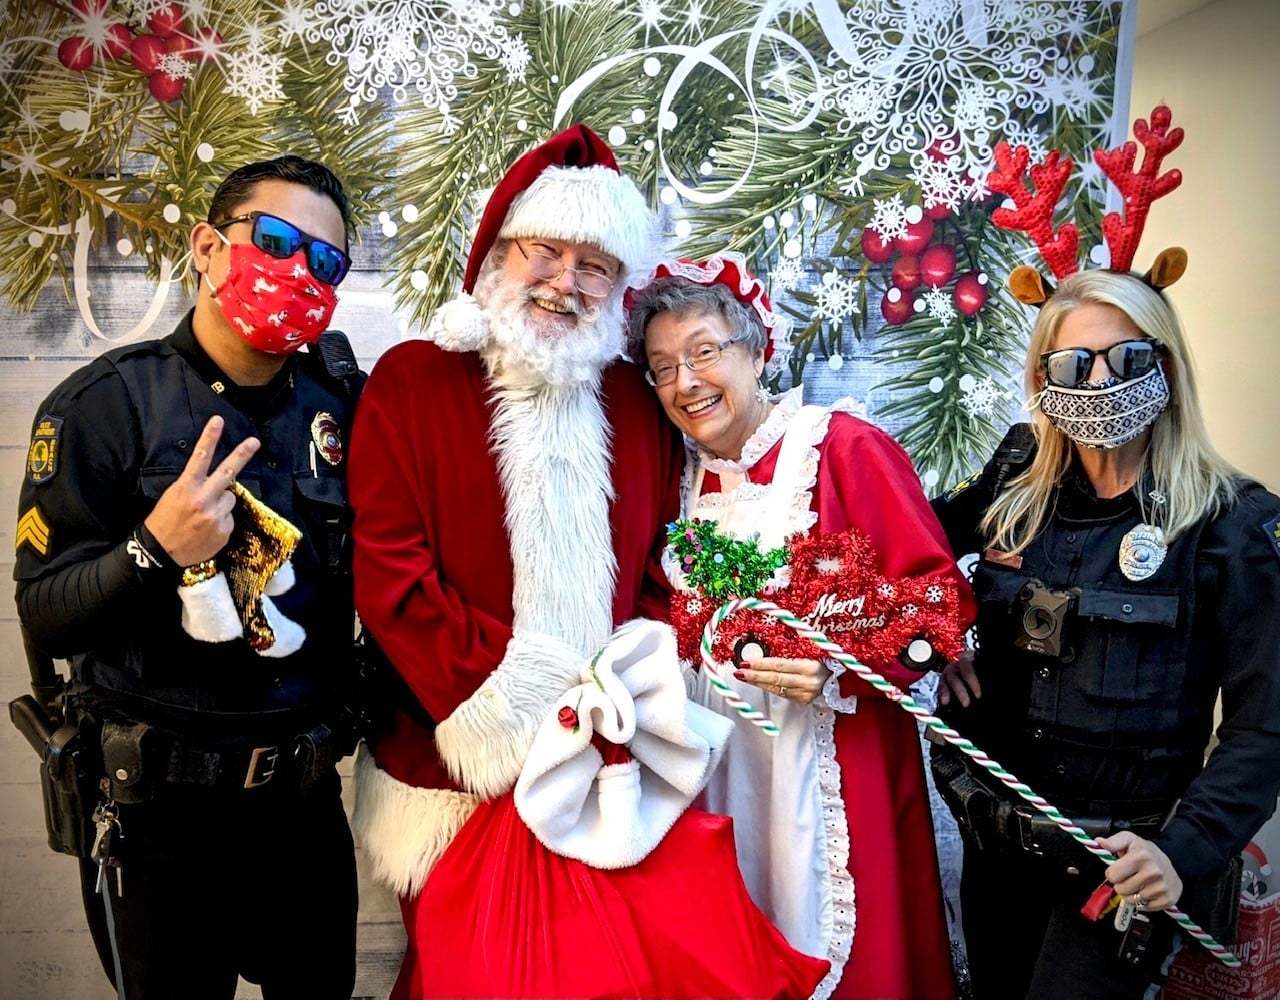 Ormond Beach Police Cpl. Jay Brennan, Santa and Mrs. Claus, and Officer Danielle Henderson. Photo courtesy of OBPD's Facebook page